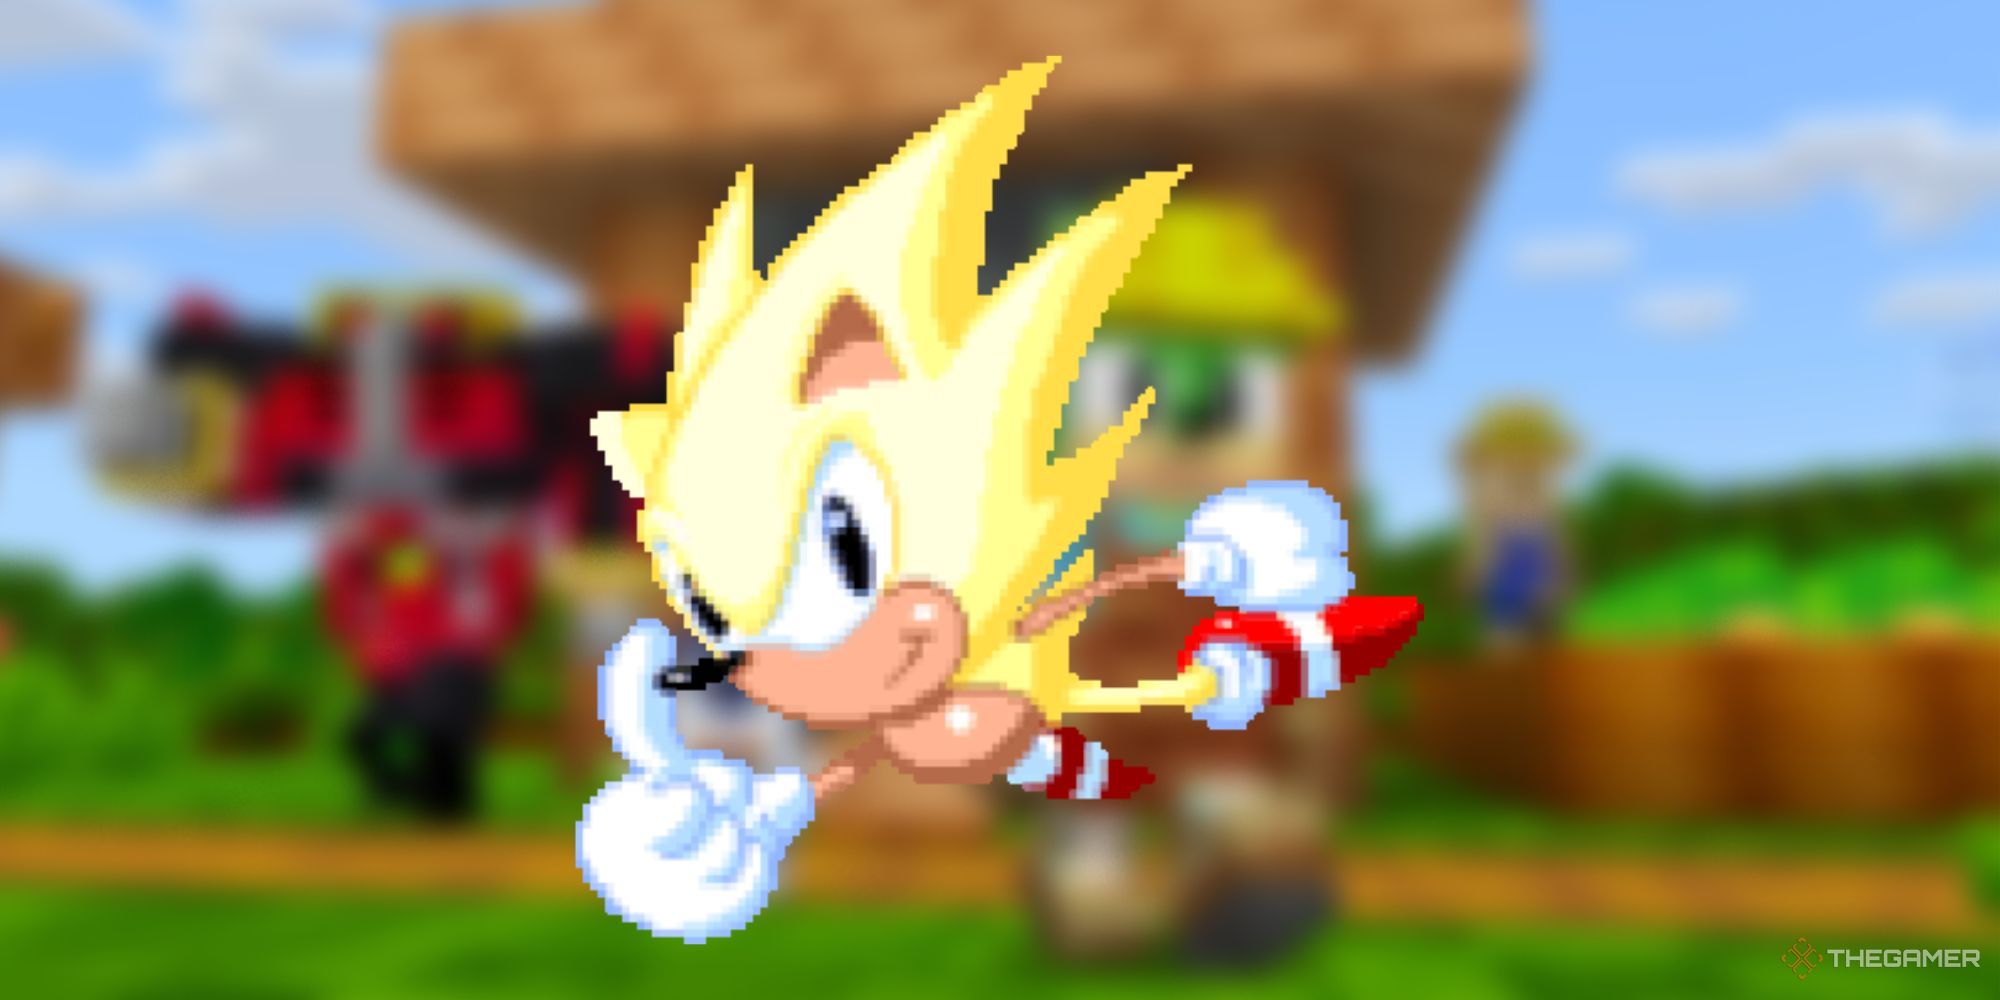 An image of Hyper Sonic - a form of Sonic that glows a white hue - on a blurred Minecraft background